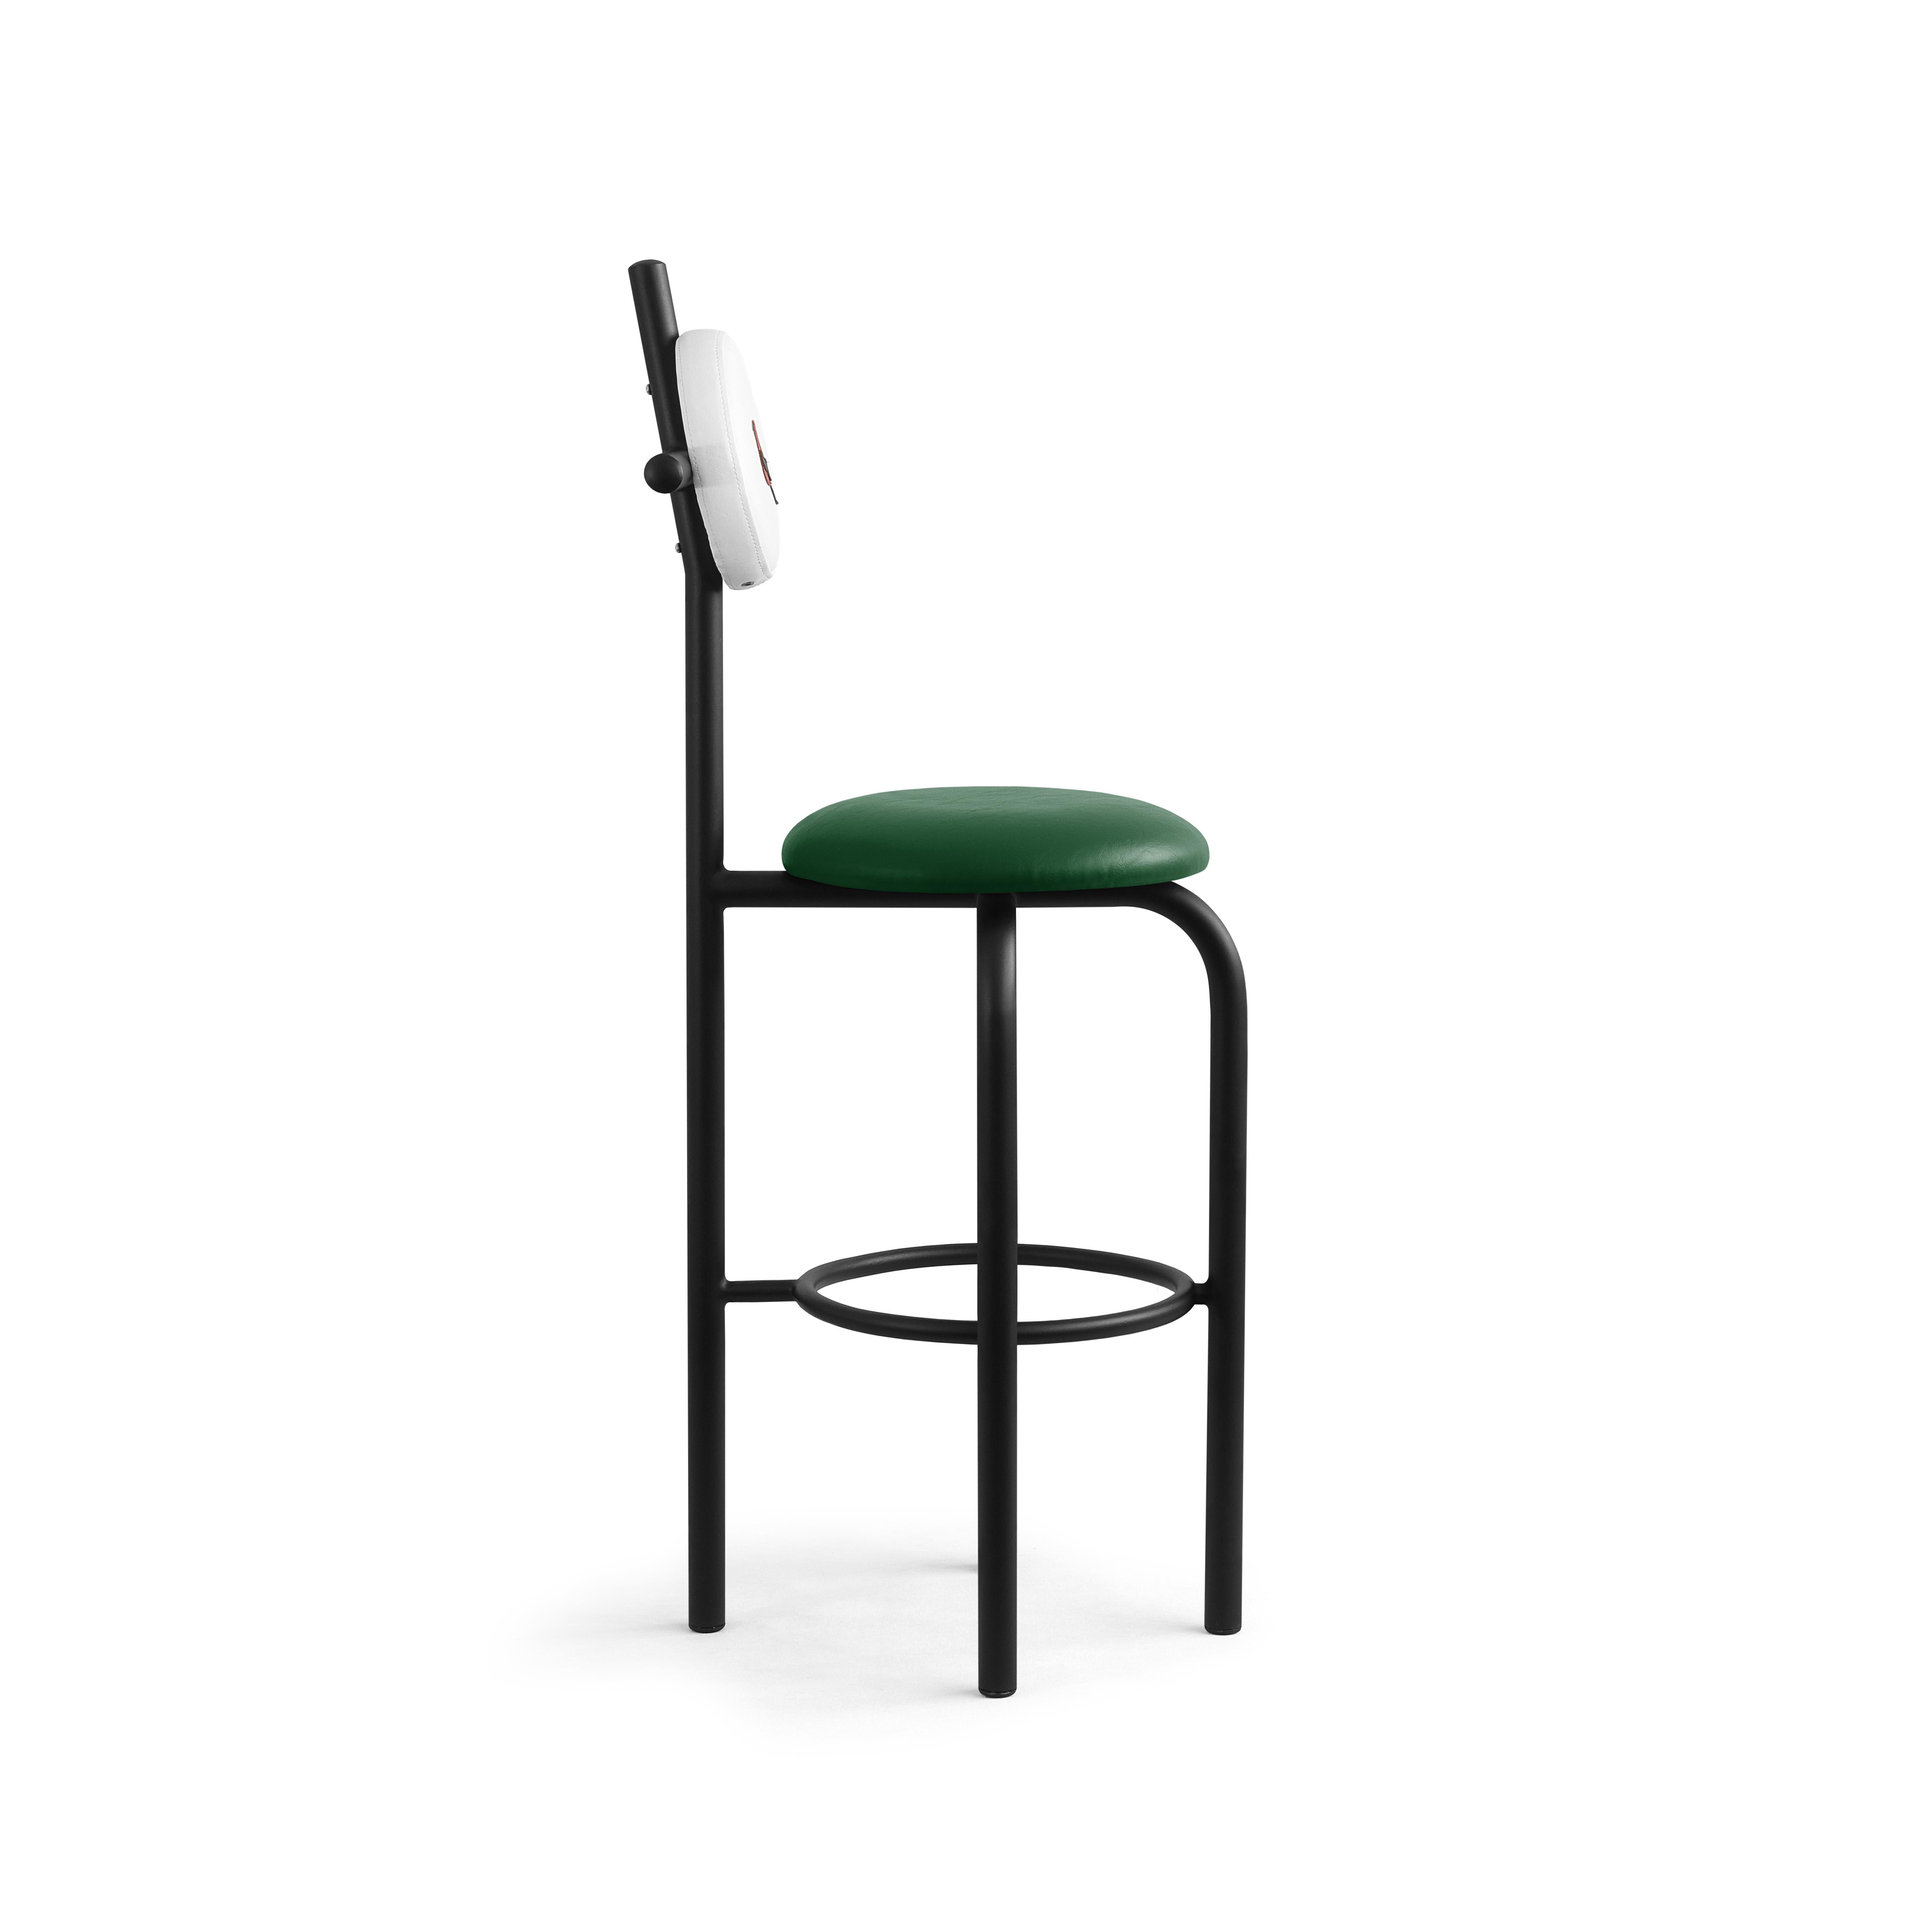 Appliqué PK19 Impermeable Bar Stool, Green Seat & Black Metal Structure by Paulo Kobylka For Sale